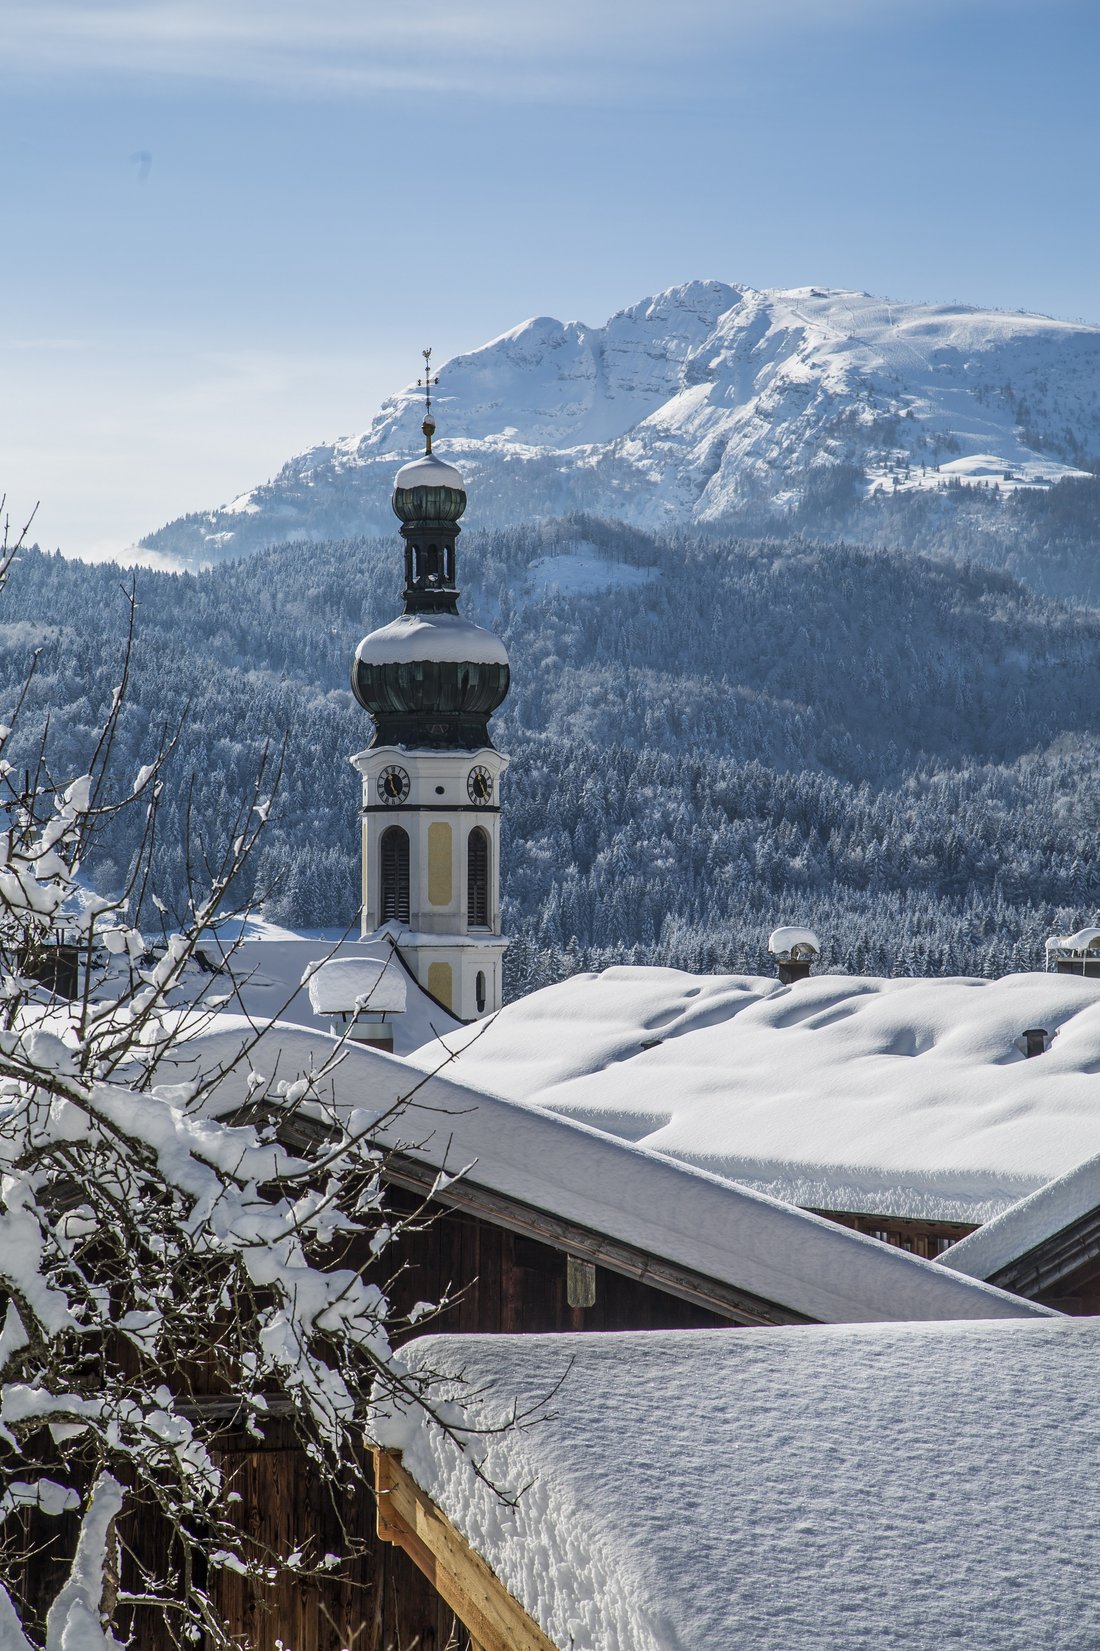 View of a snow-covered church in Reit im Winkl in the sunshine